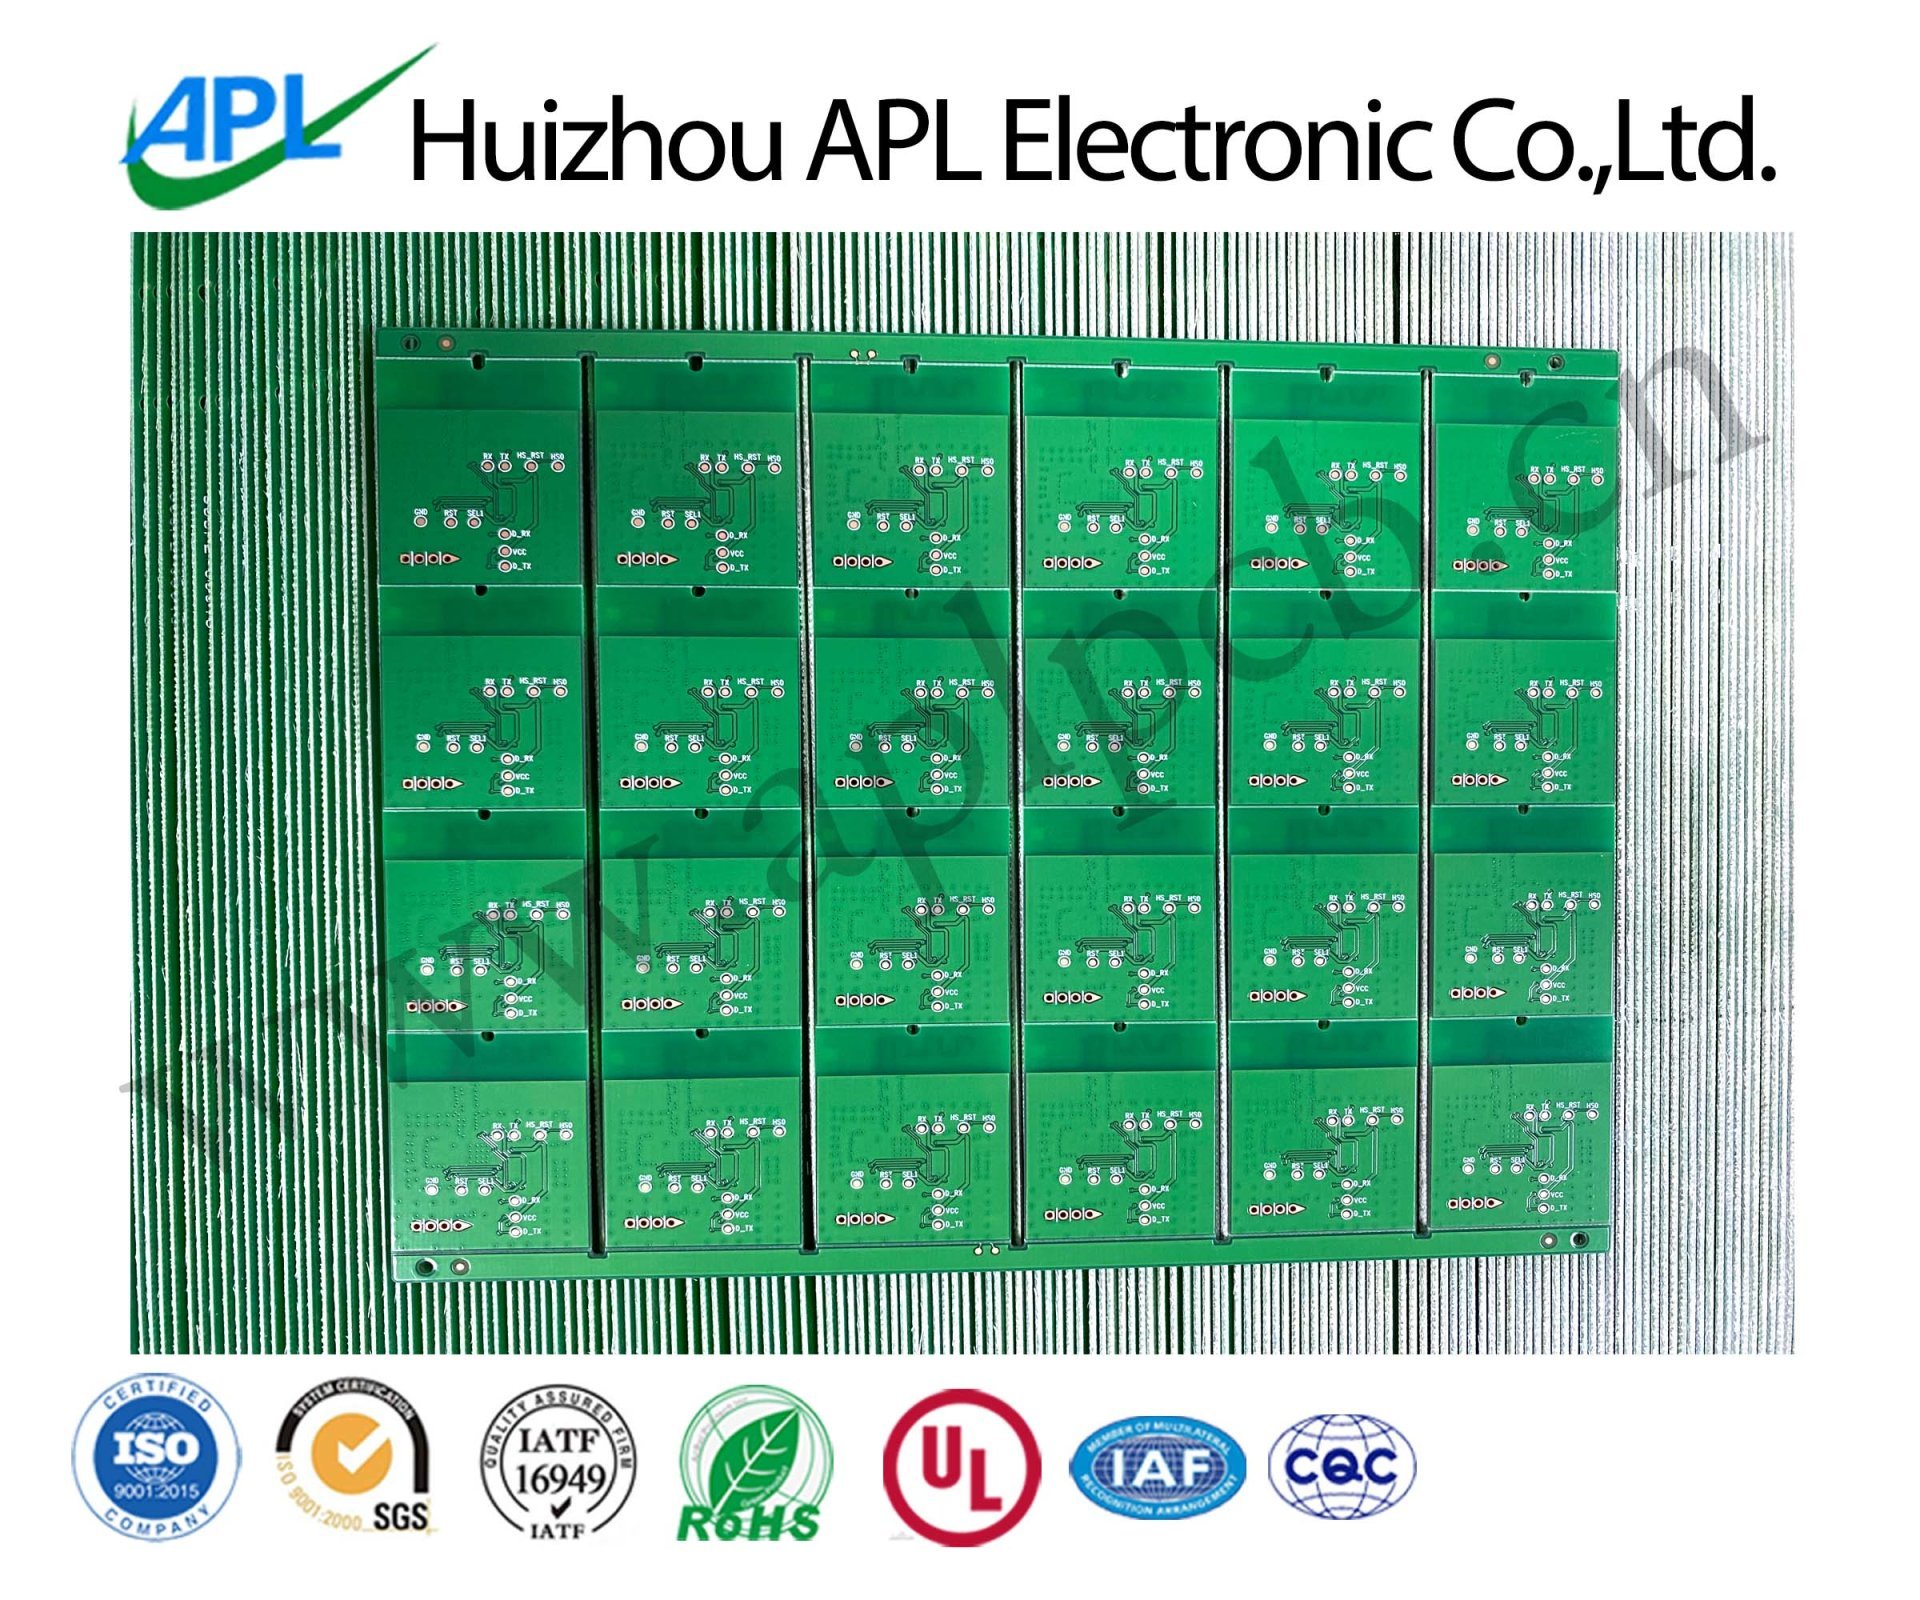 Double-sided printed circuit board OSP is used in communication products